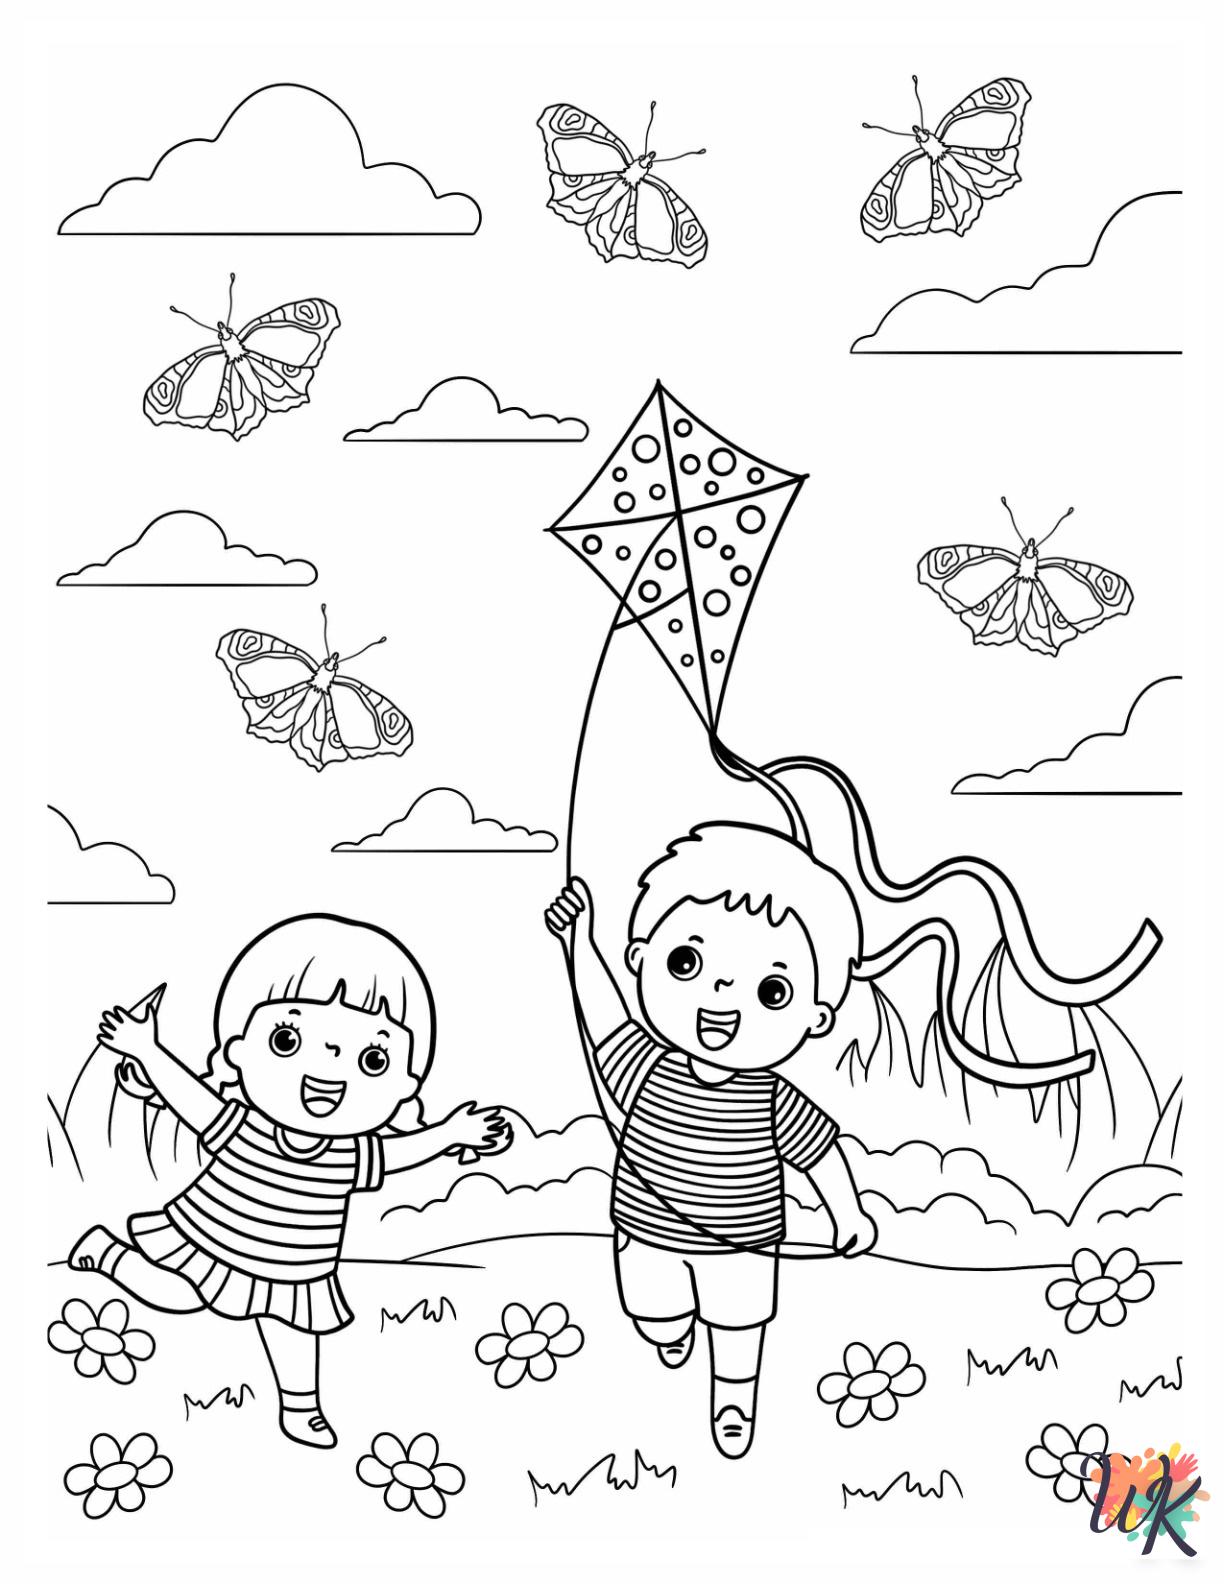 Kite Coloring Pages 1